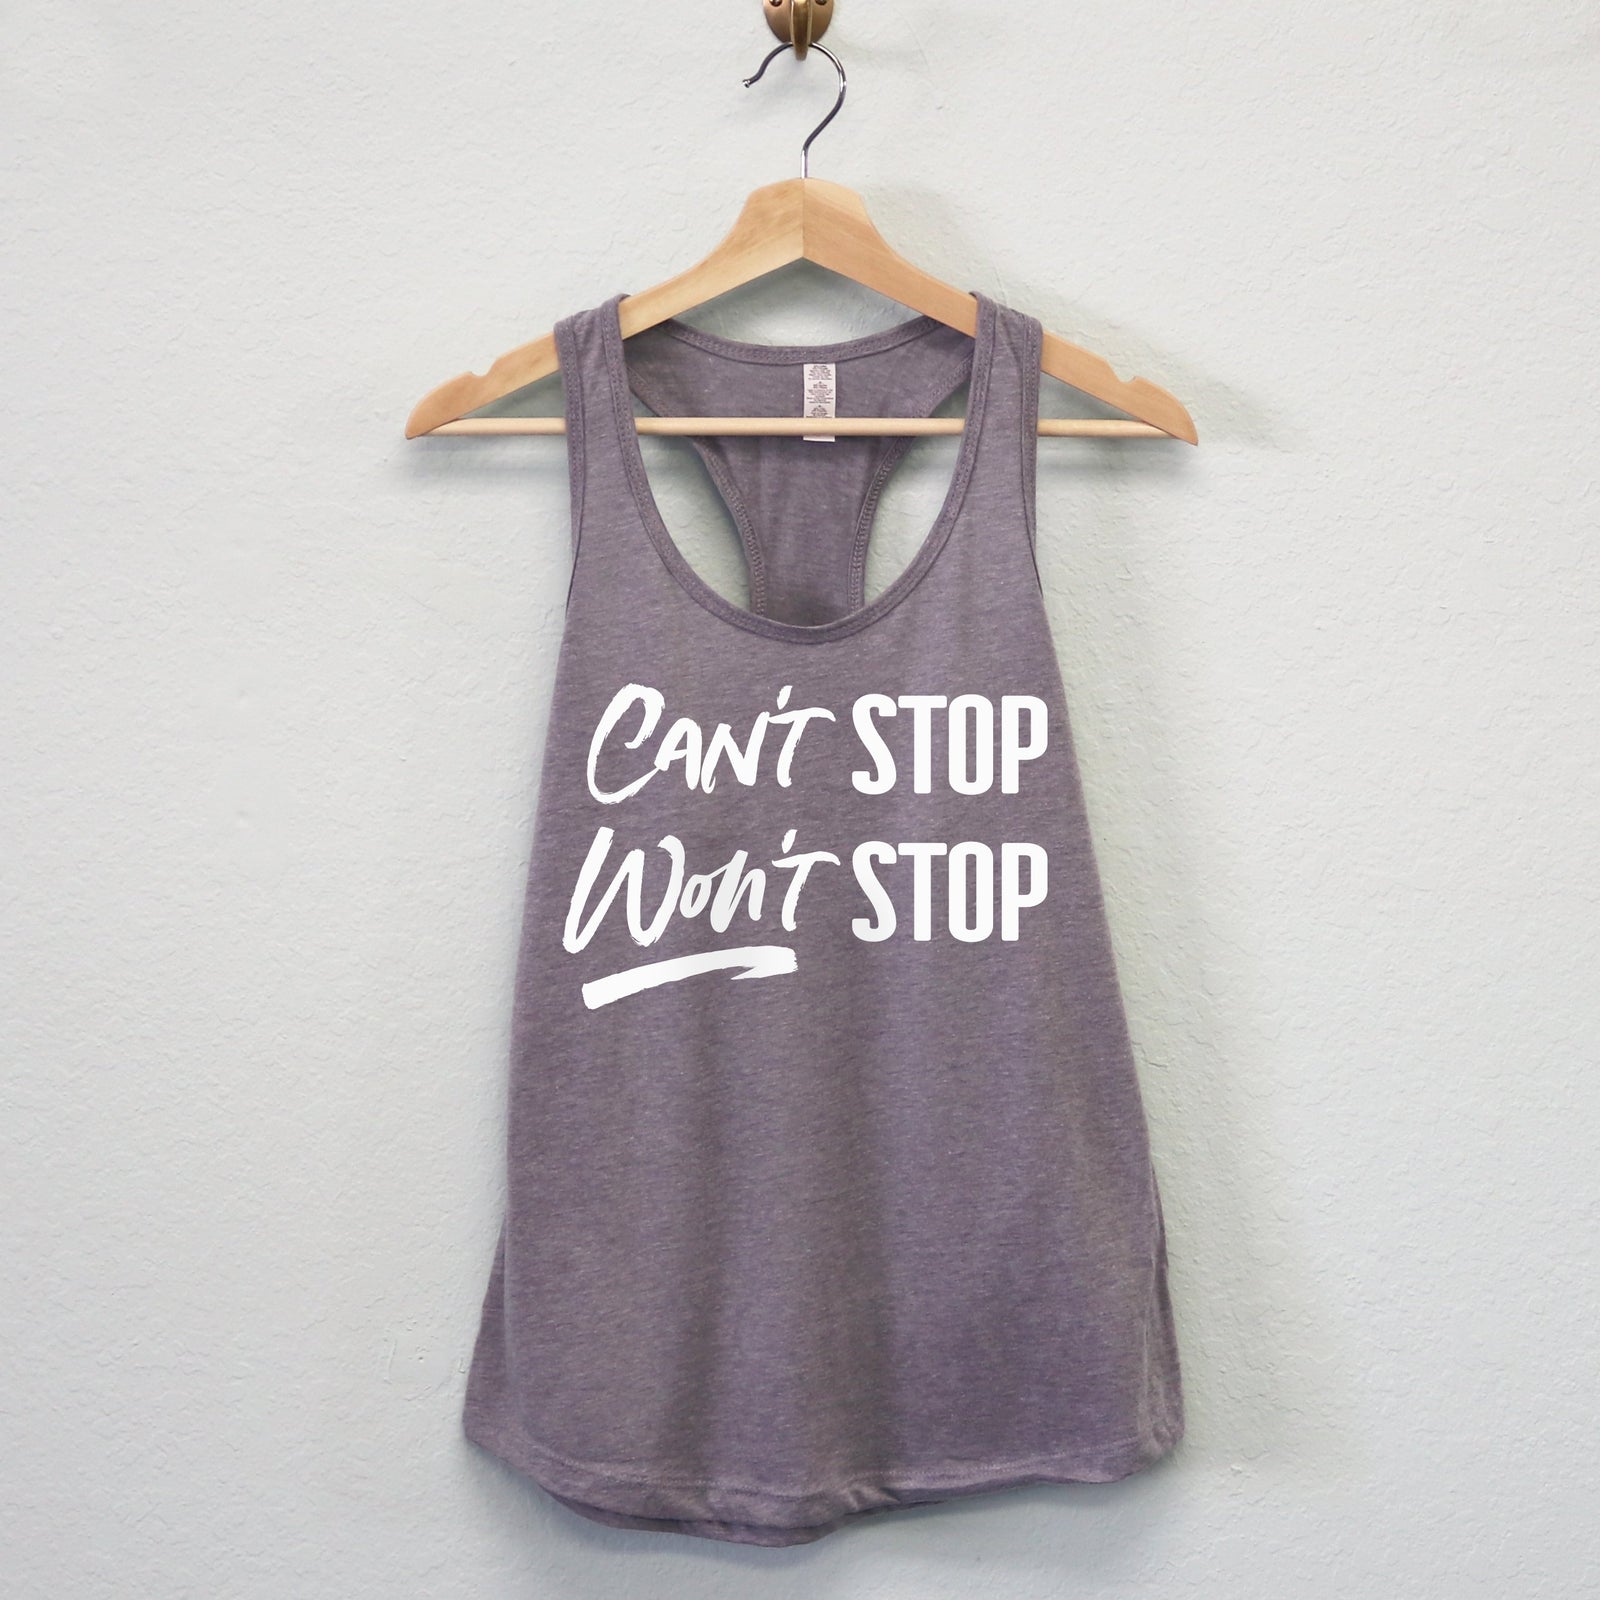 Can't Stop Won't Stop Racerback Tank Top - All Good Laces